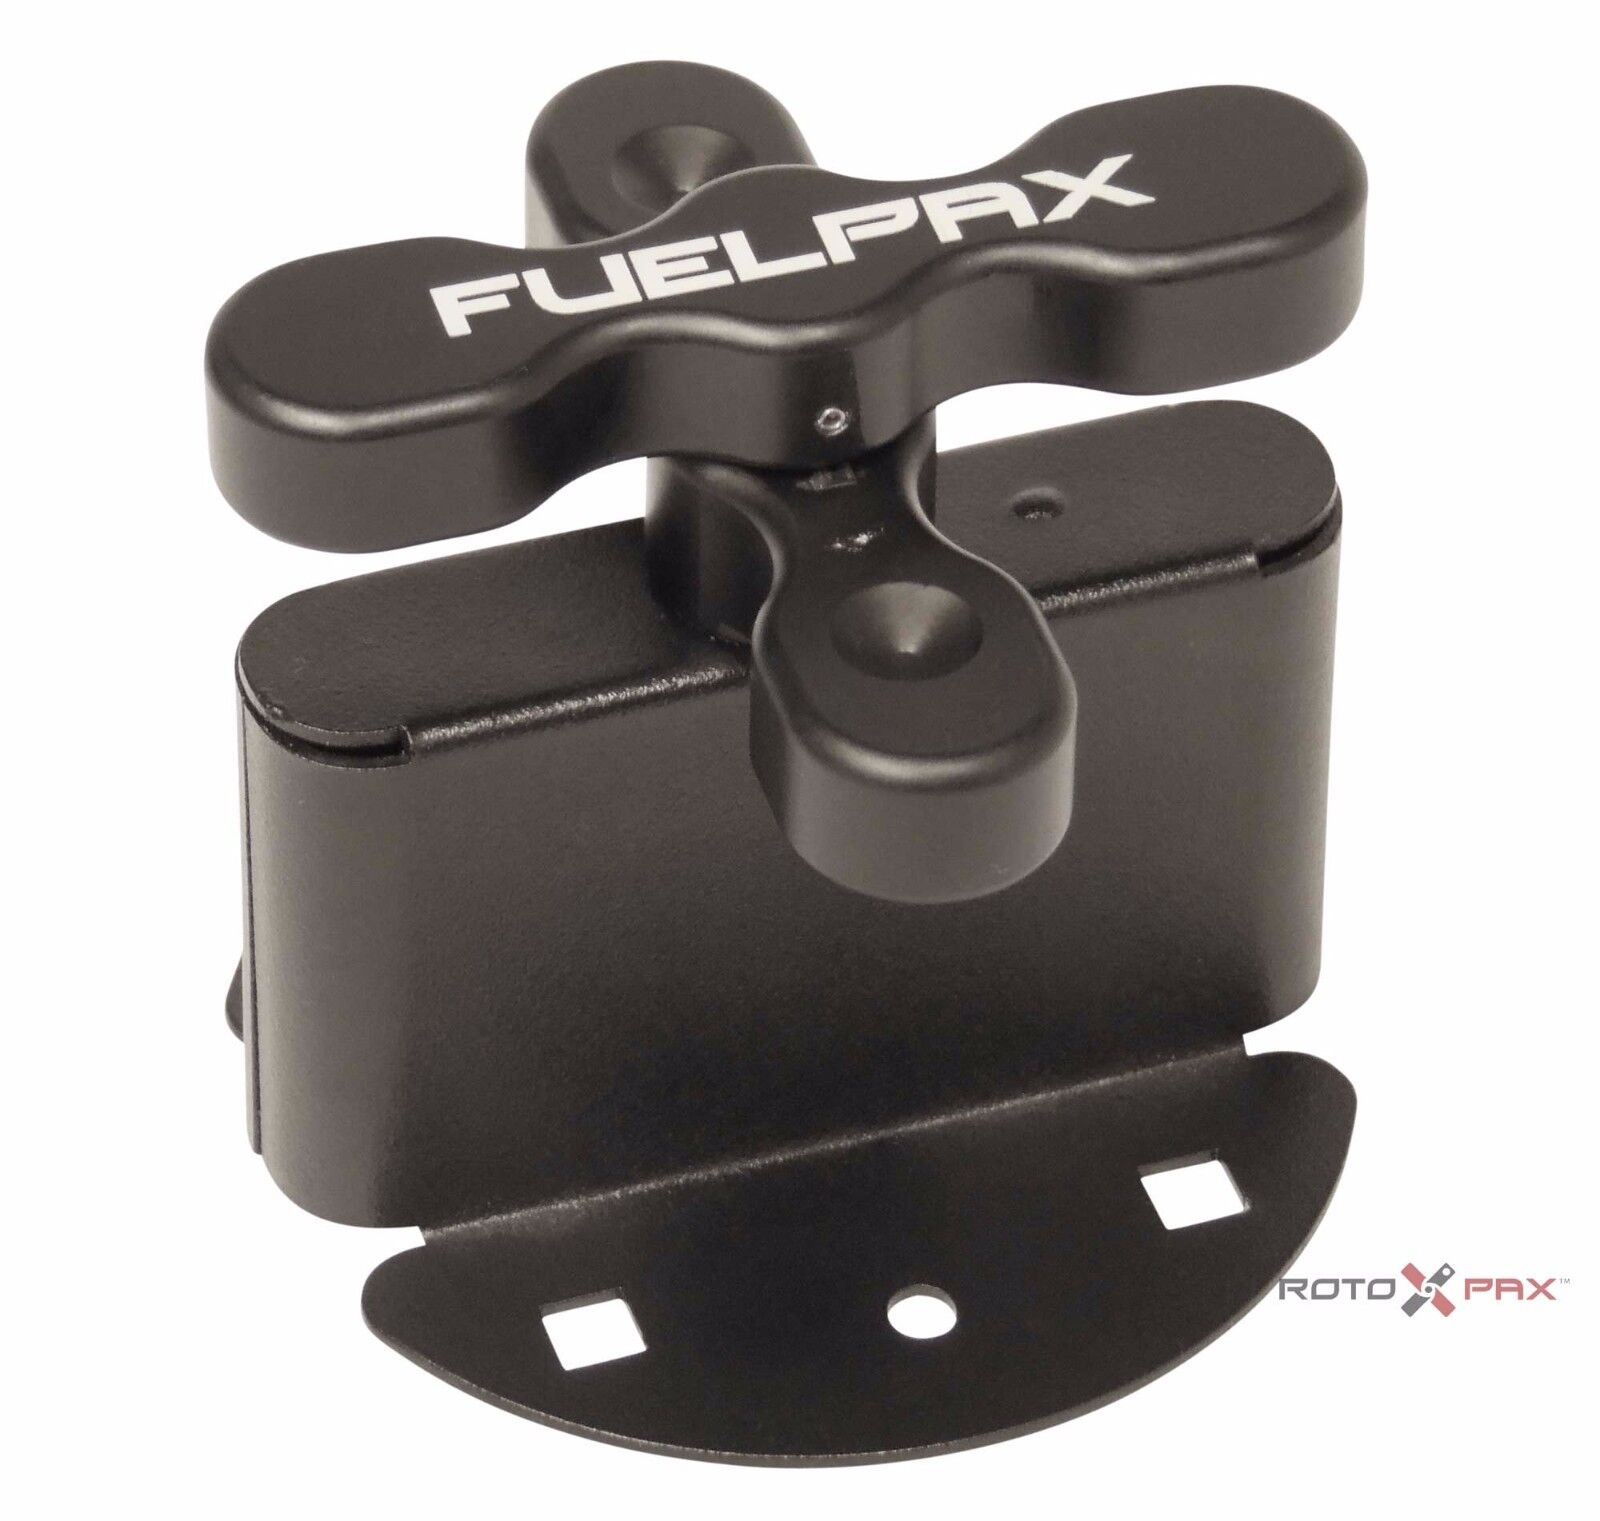 FuelpaX DLX Pack Mount Polaris RZR Gas Fuel Container Can Gas Can Mount